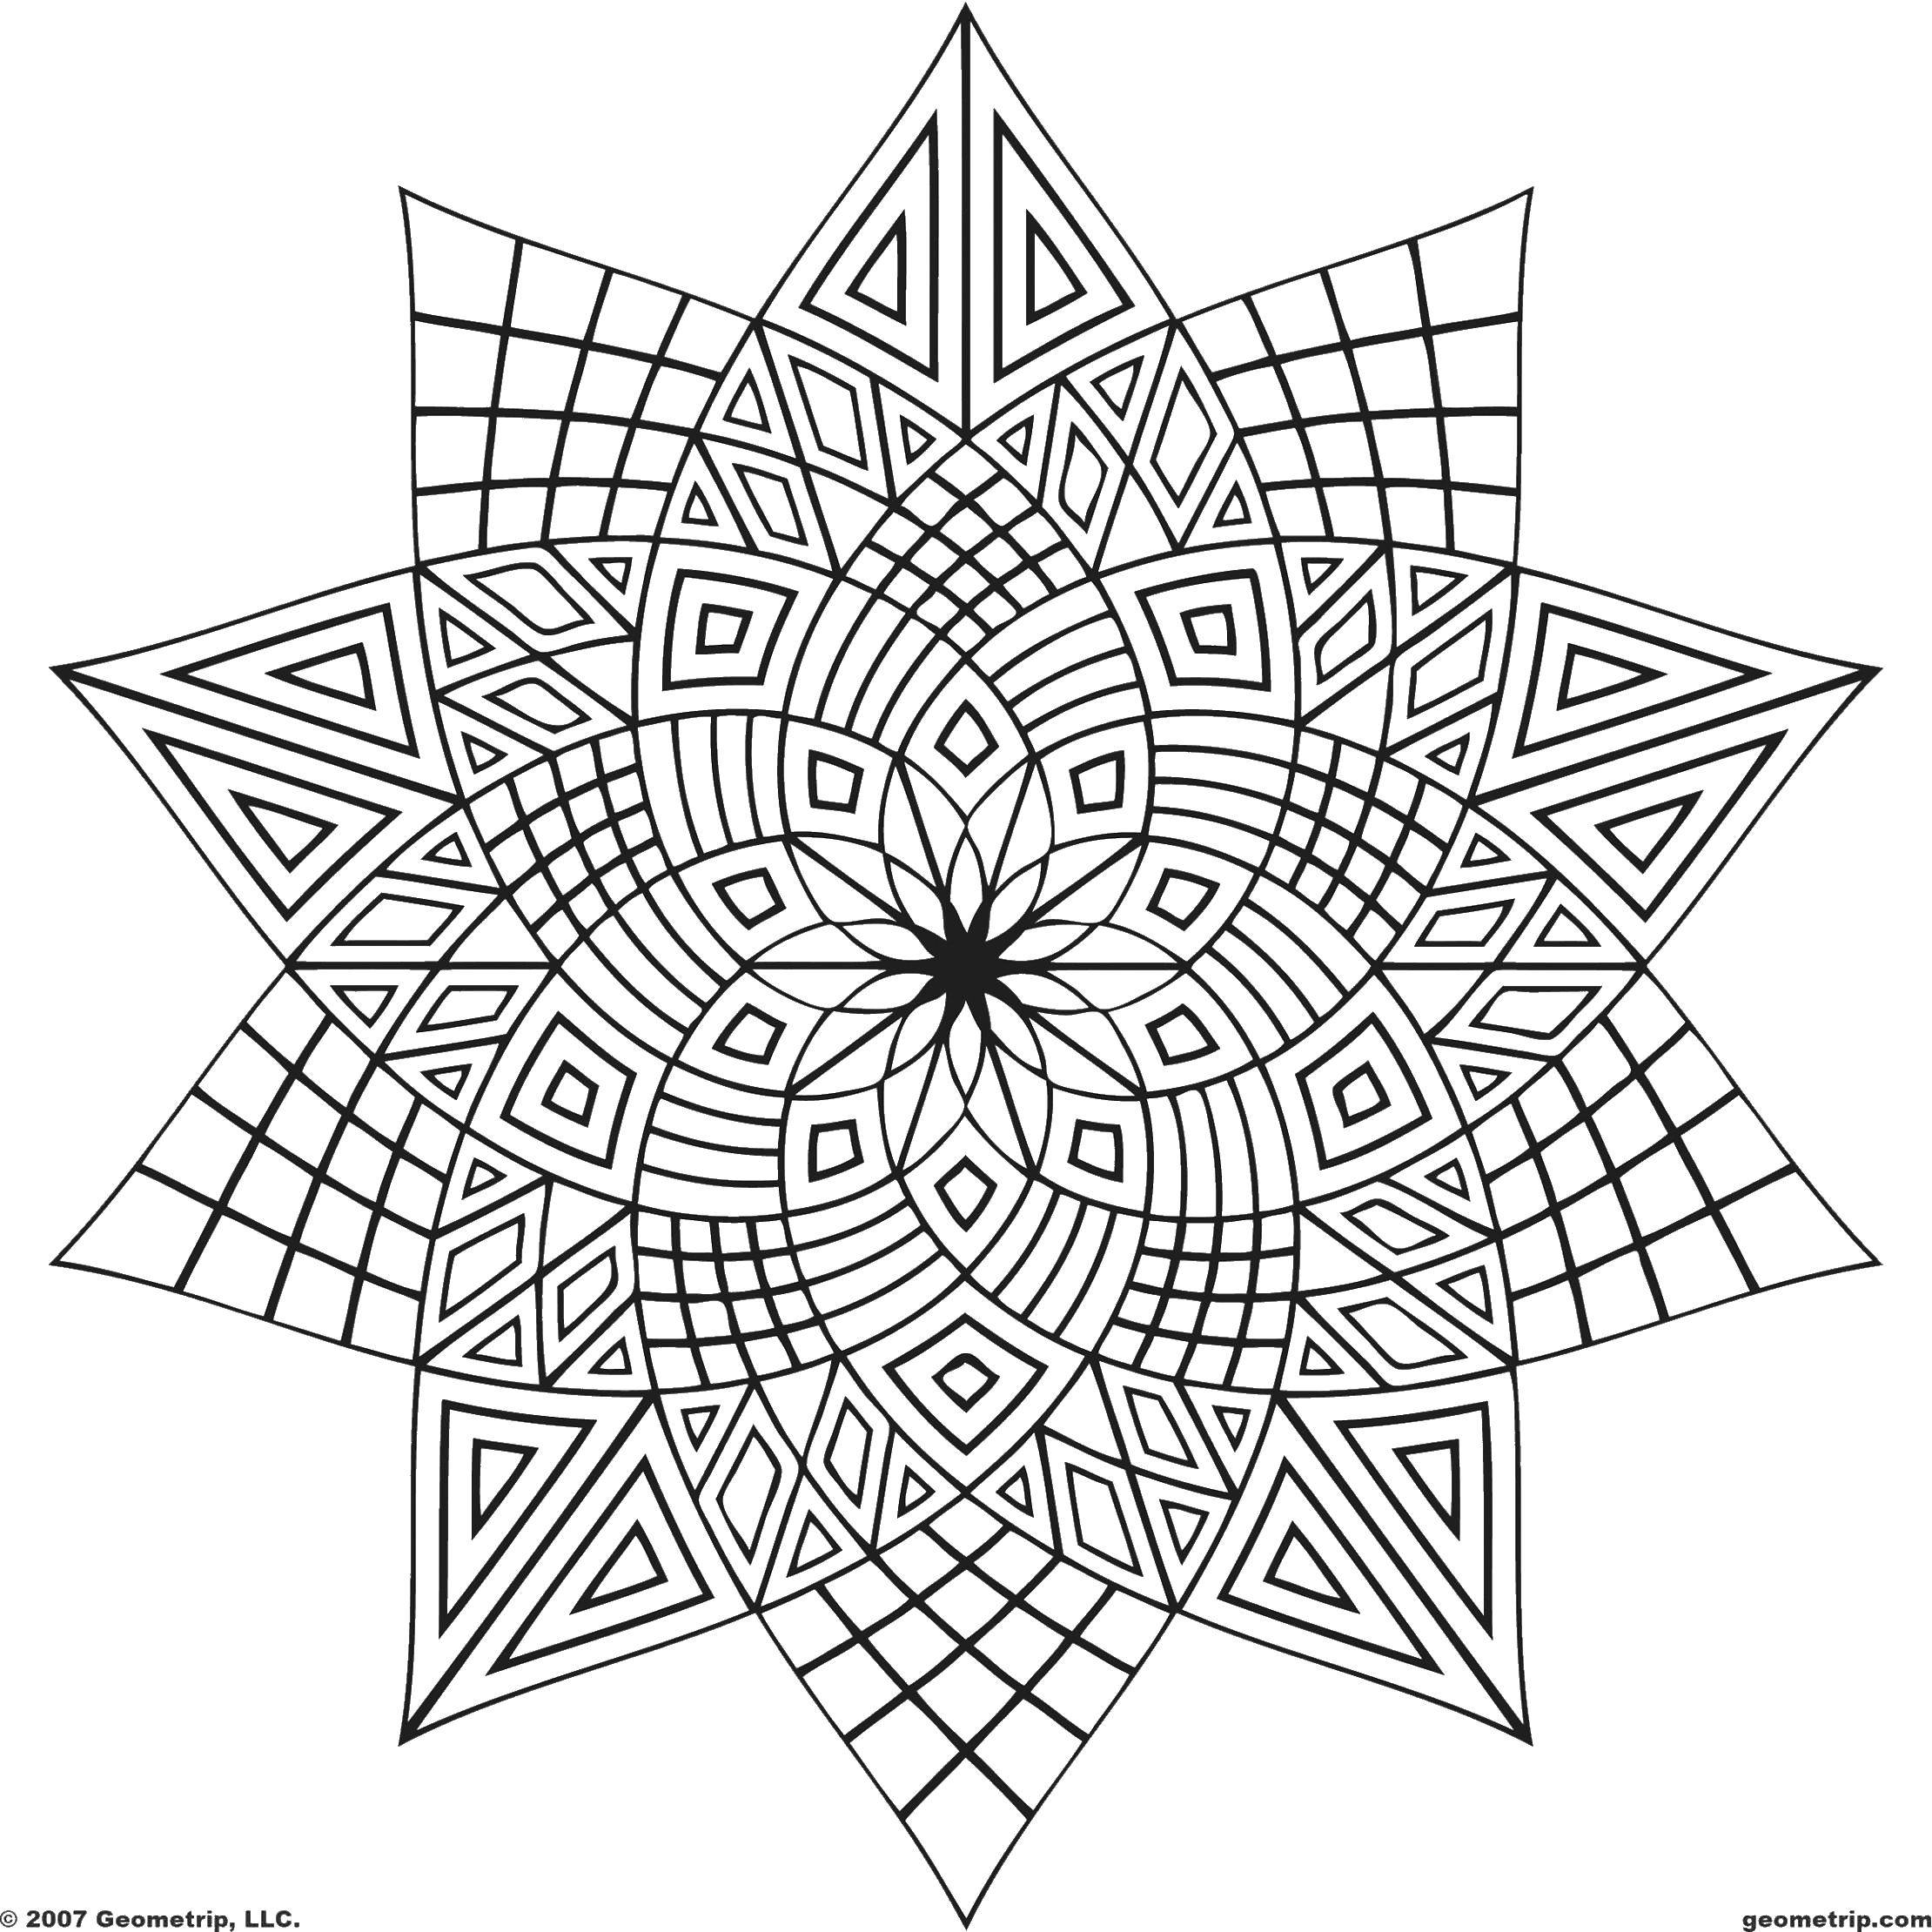 Coloring Patterned flower. Category coloring. Tags:  Patterns, flower.